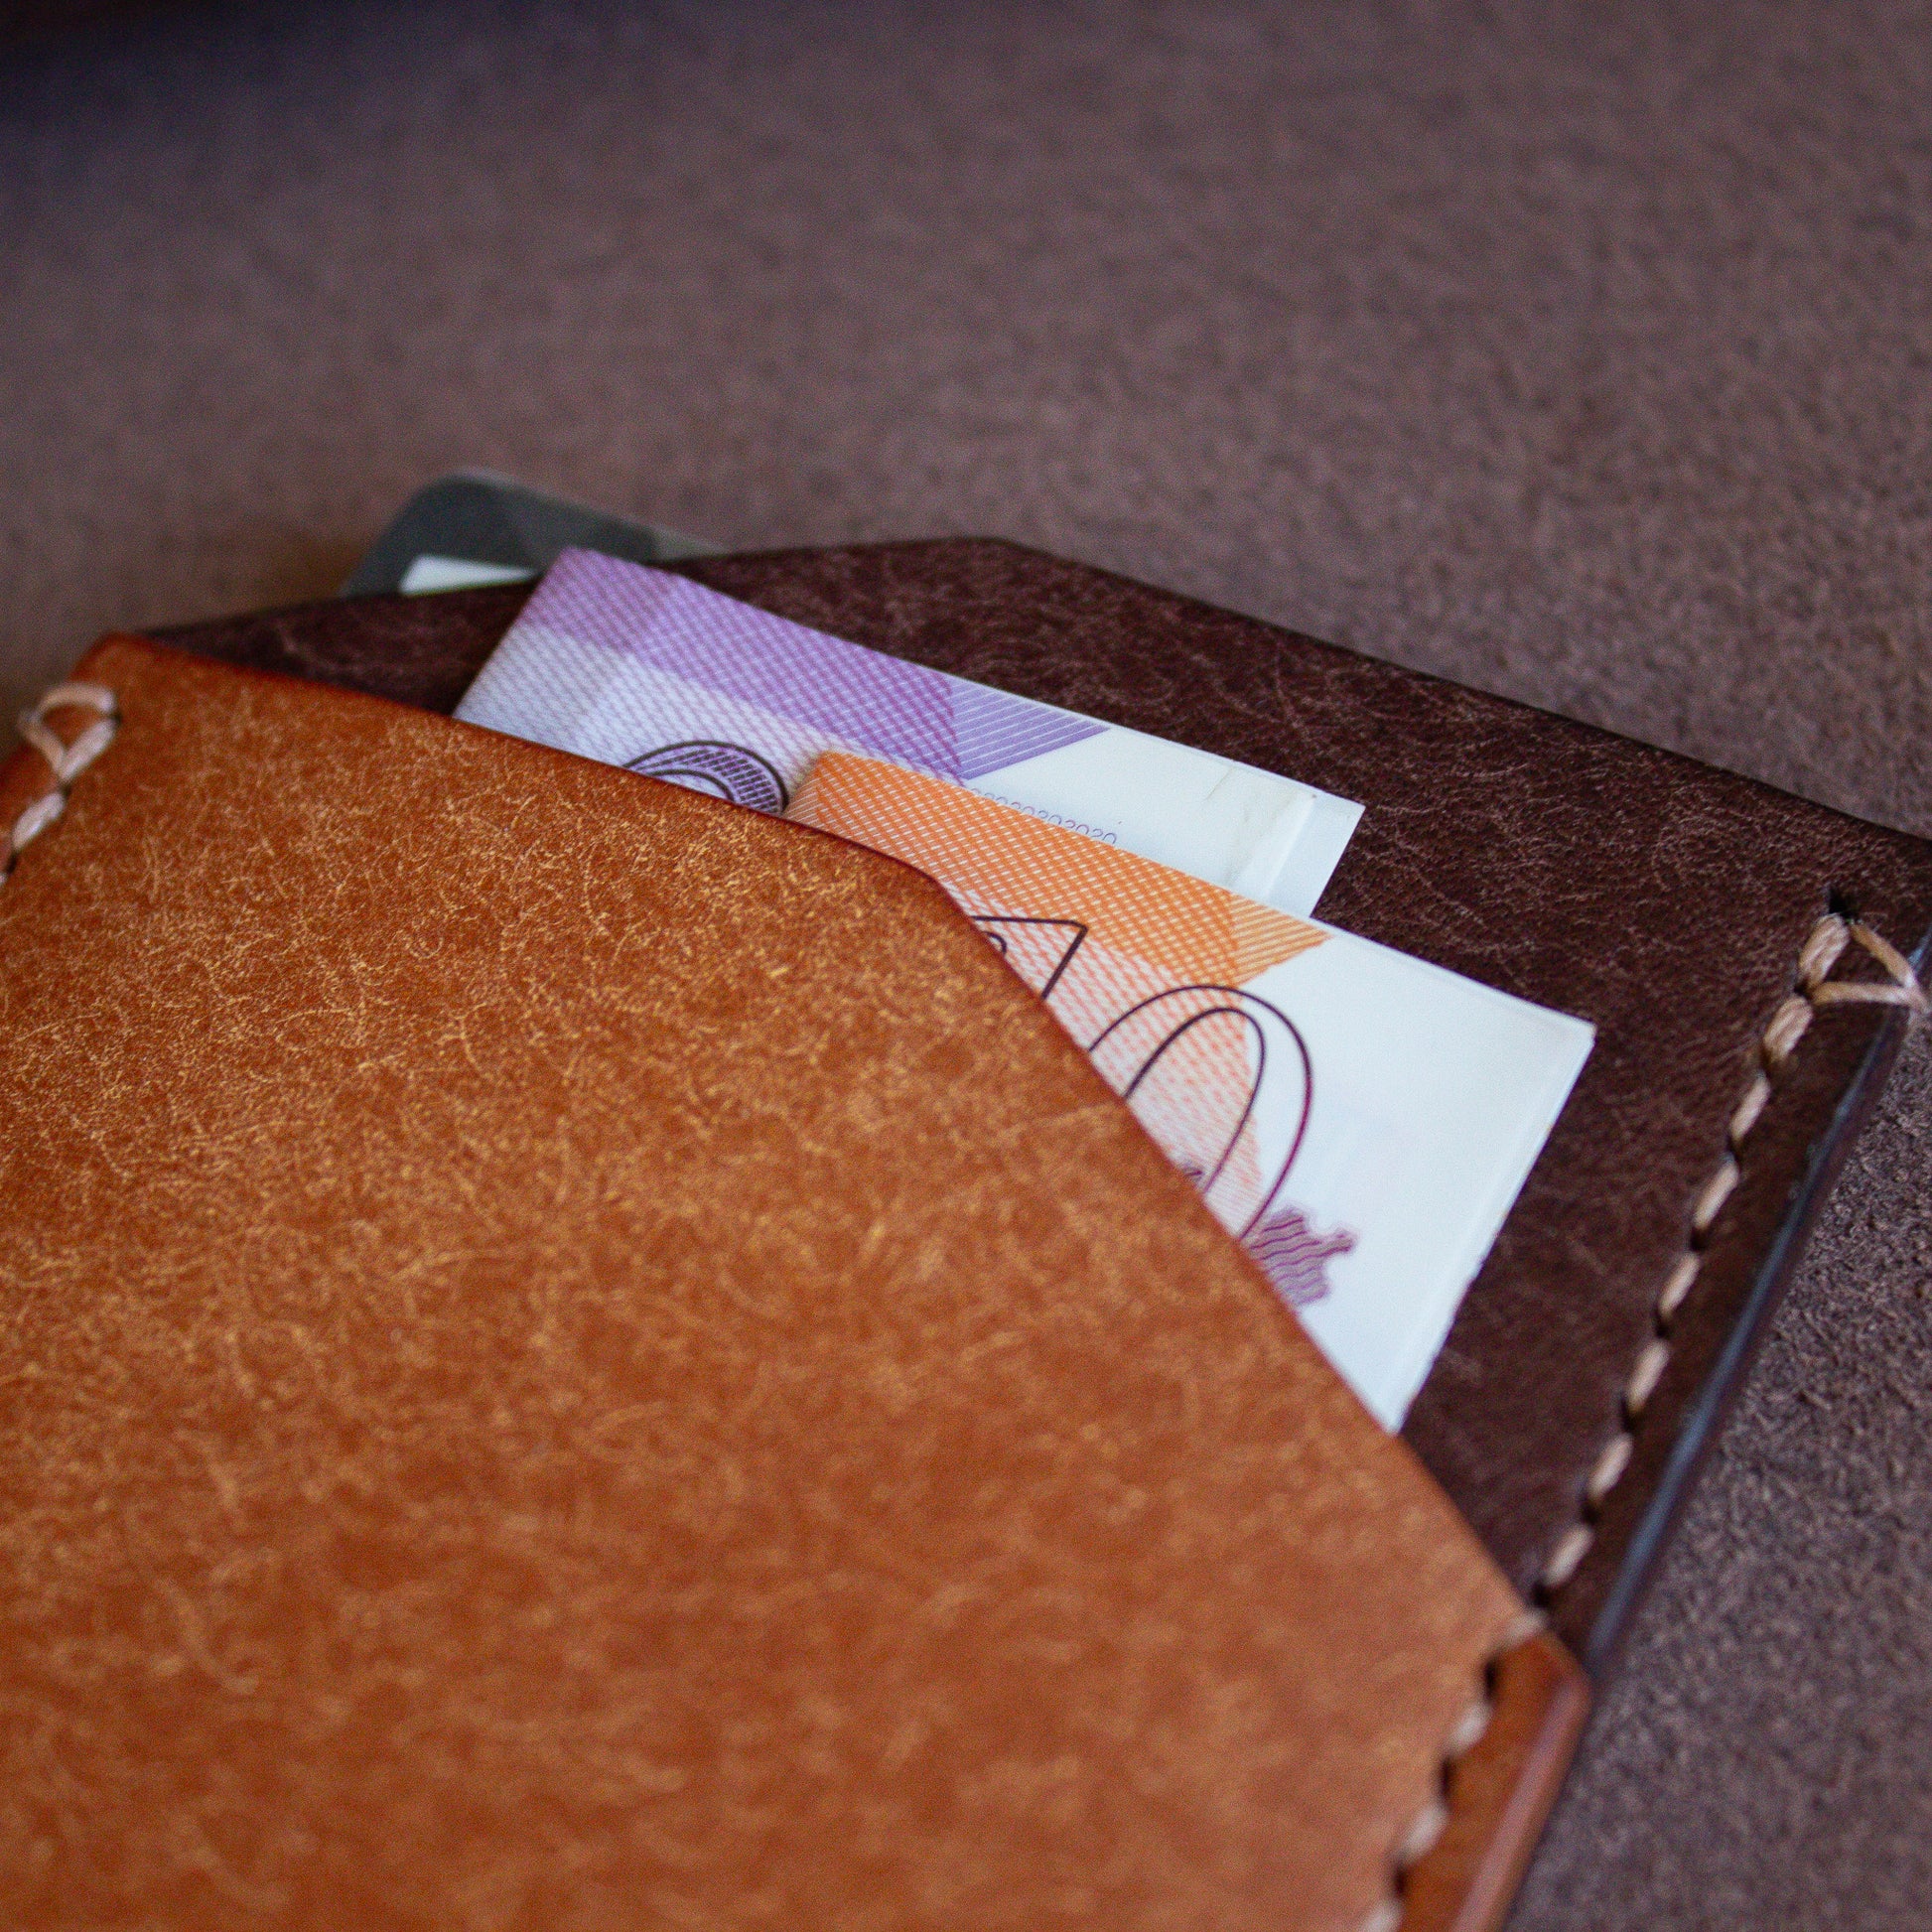 Elkwood Leather - The Maple - minimalist full grain Italian Pueblo leather cardholder wallet close up of pocket with cash and credit cards on roll of leather next to wood grain